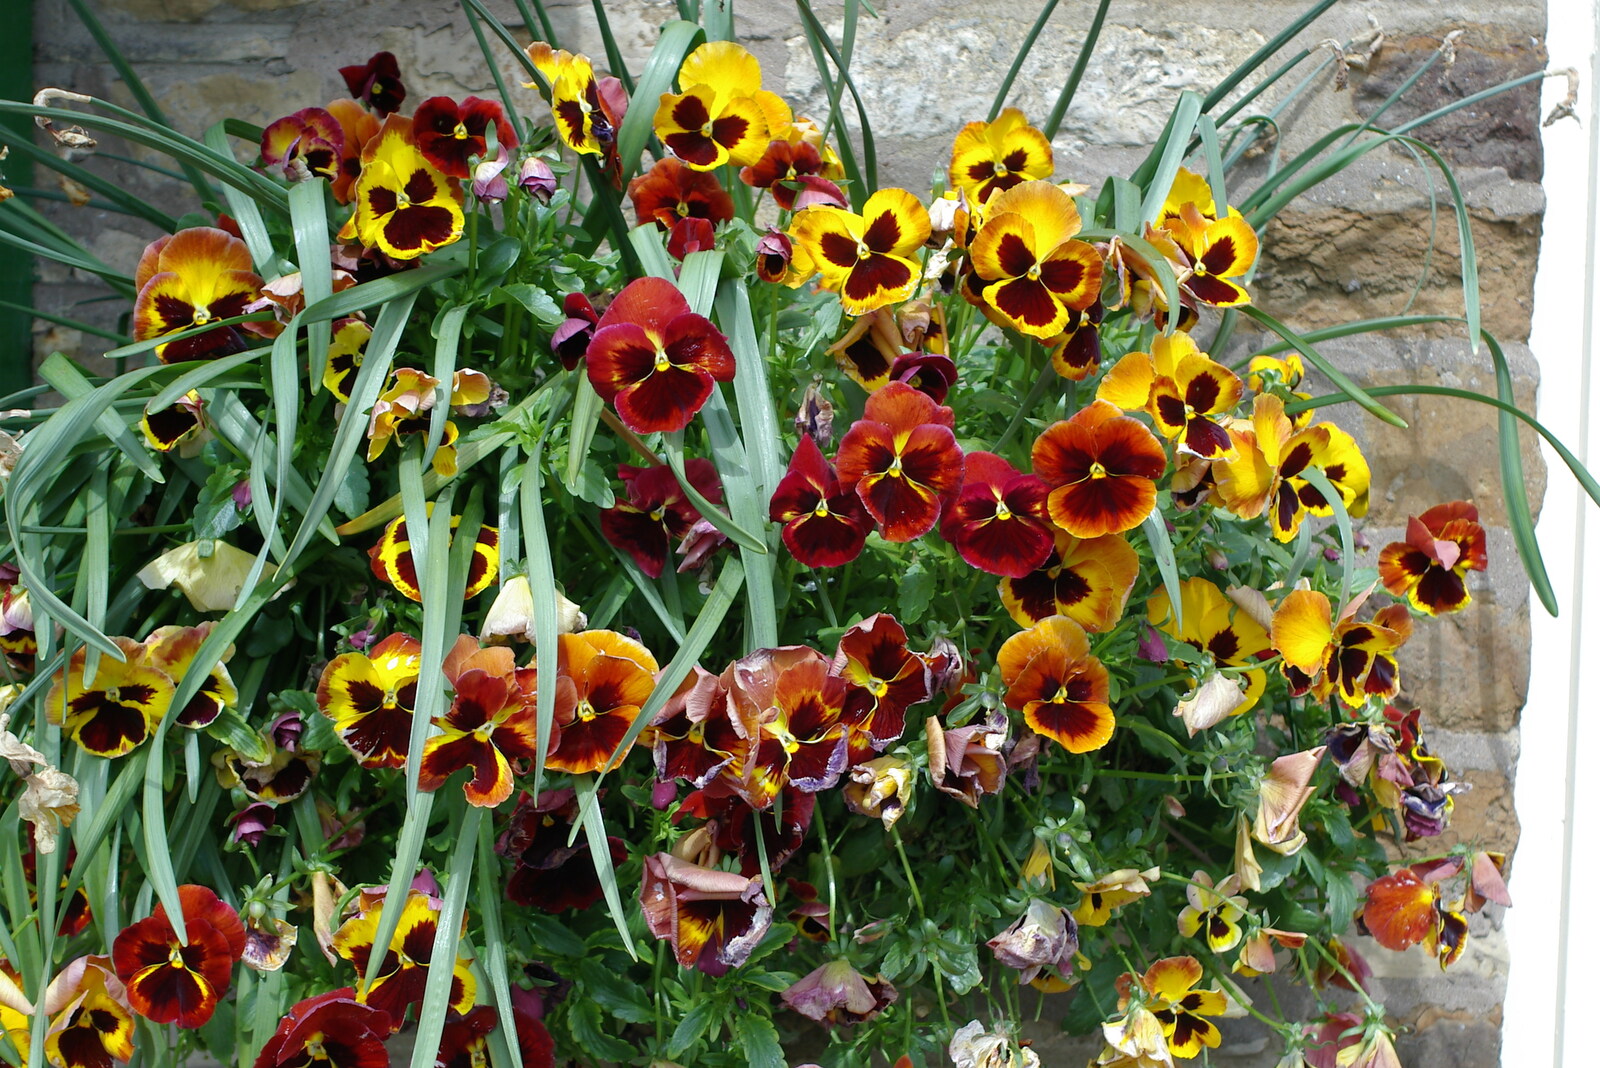 A bunch of pansies in a hanging basket from The BSCC Weekend Trip to Rutland Water, Empingham, Rutland - 14th May 2005